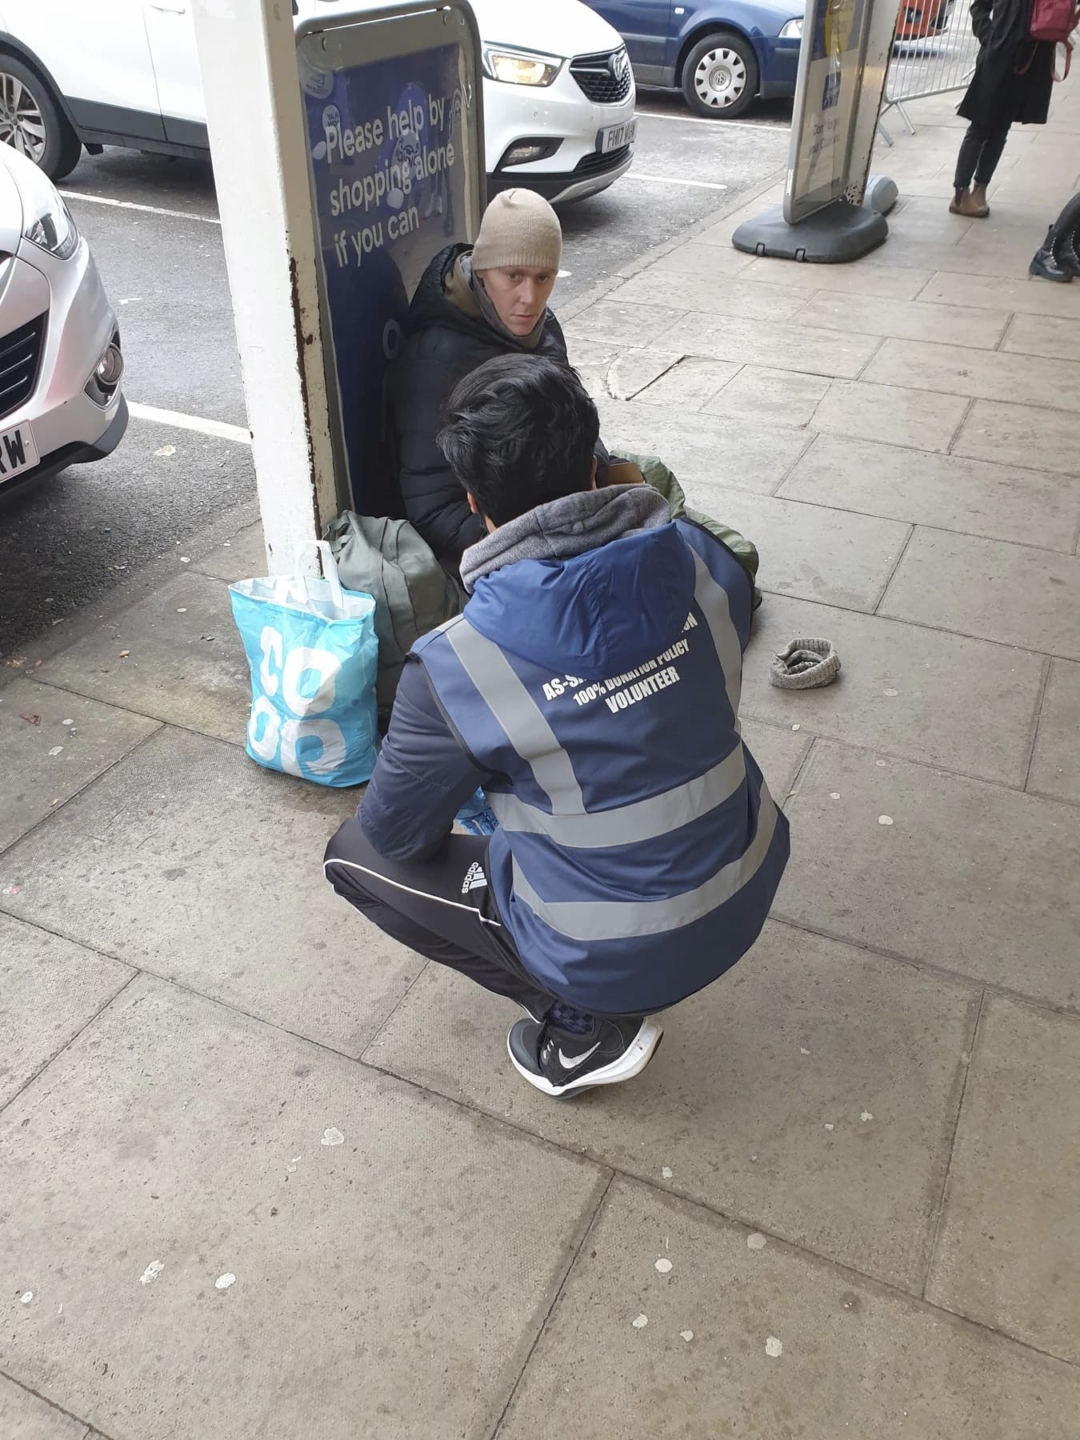 A young volunteer kneeled over helping a homeless man in the UK